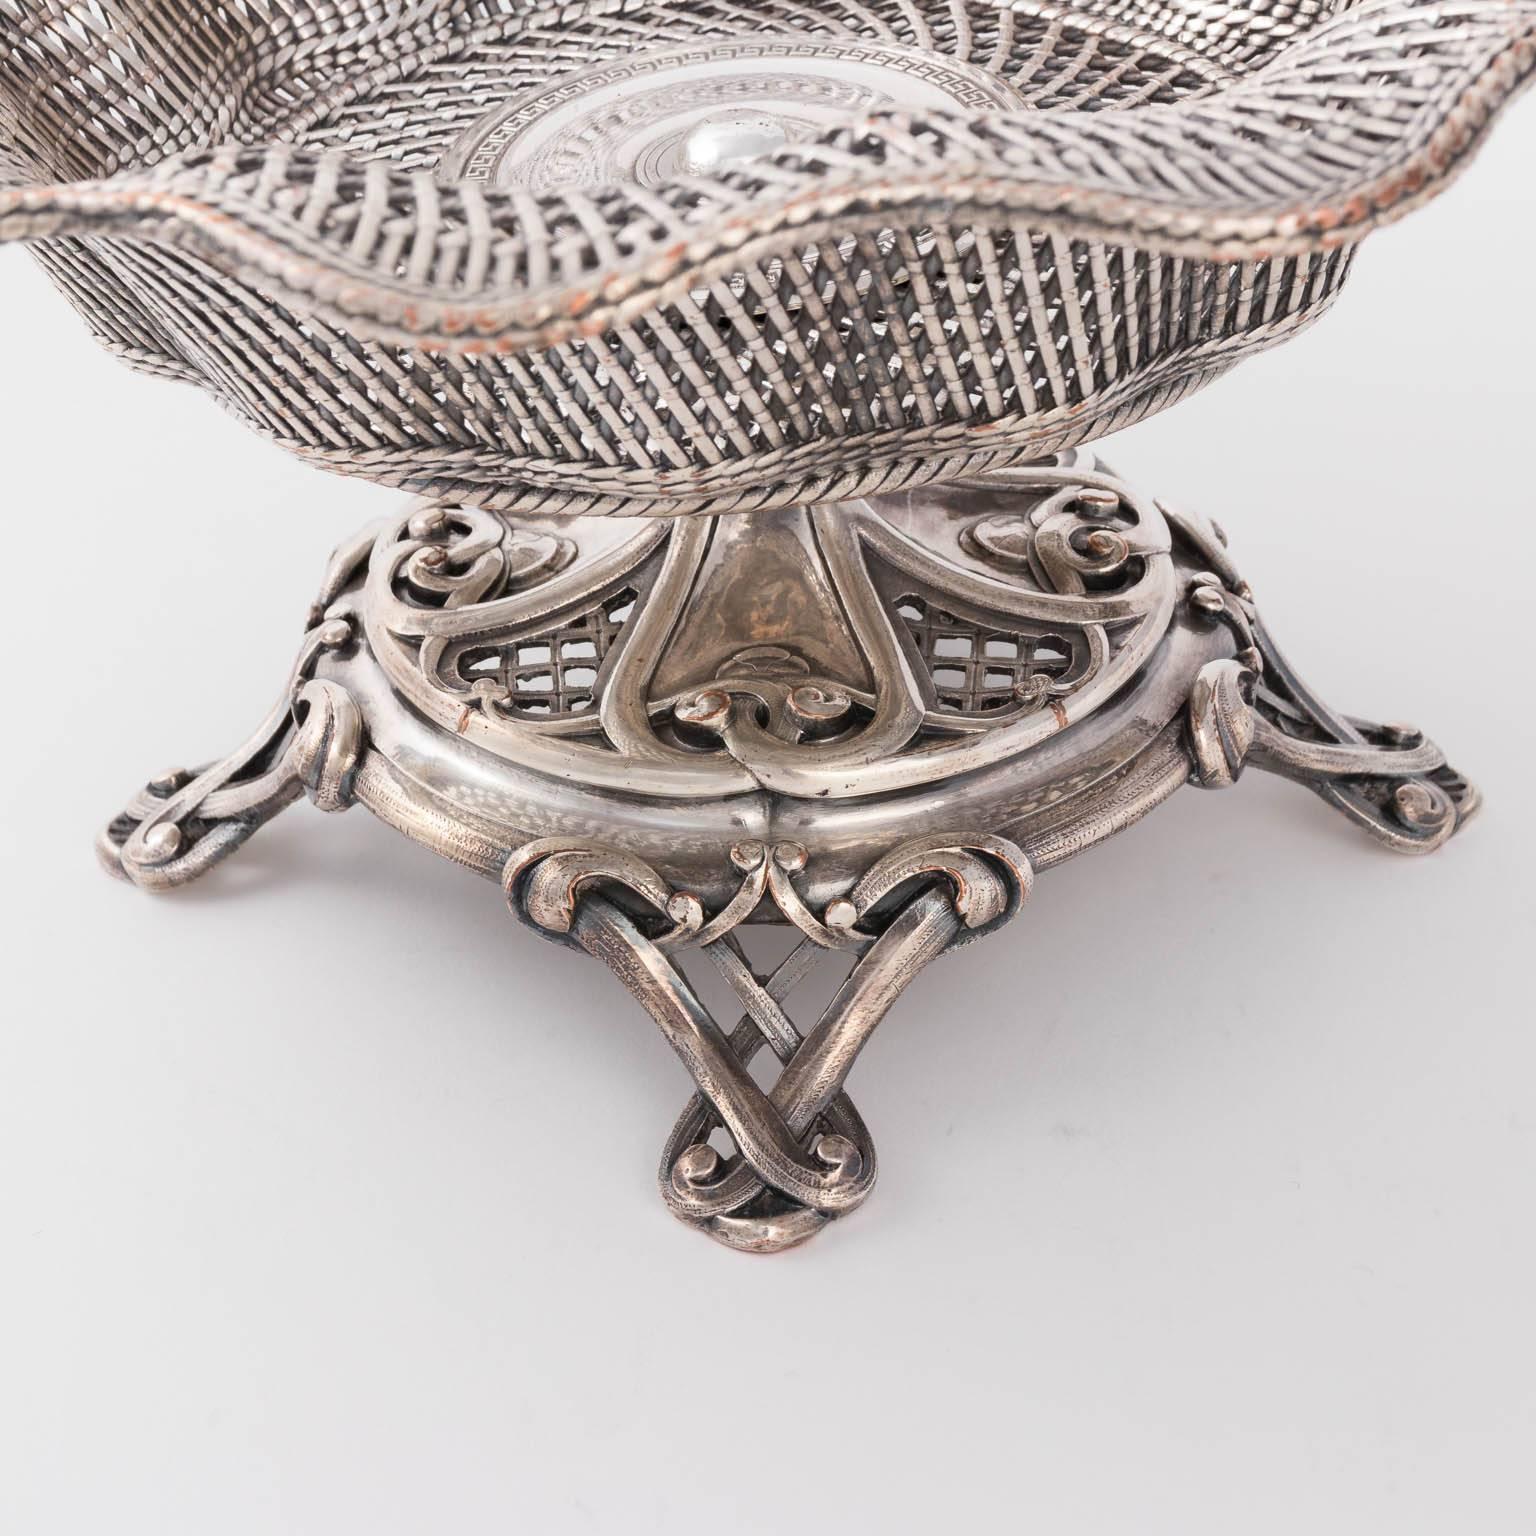 Woven silvered basket by Christolfe, circa 20th century. Originally retailed at Berdorf Goodman for $1195 in their vintage home collection.
 